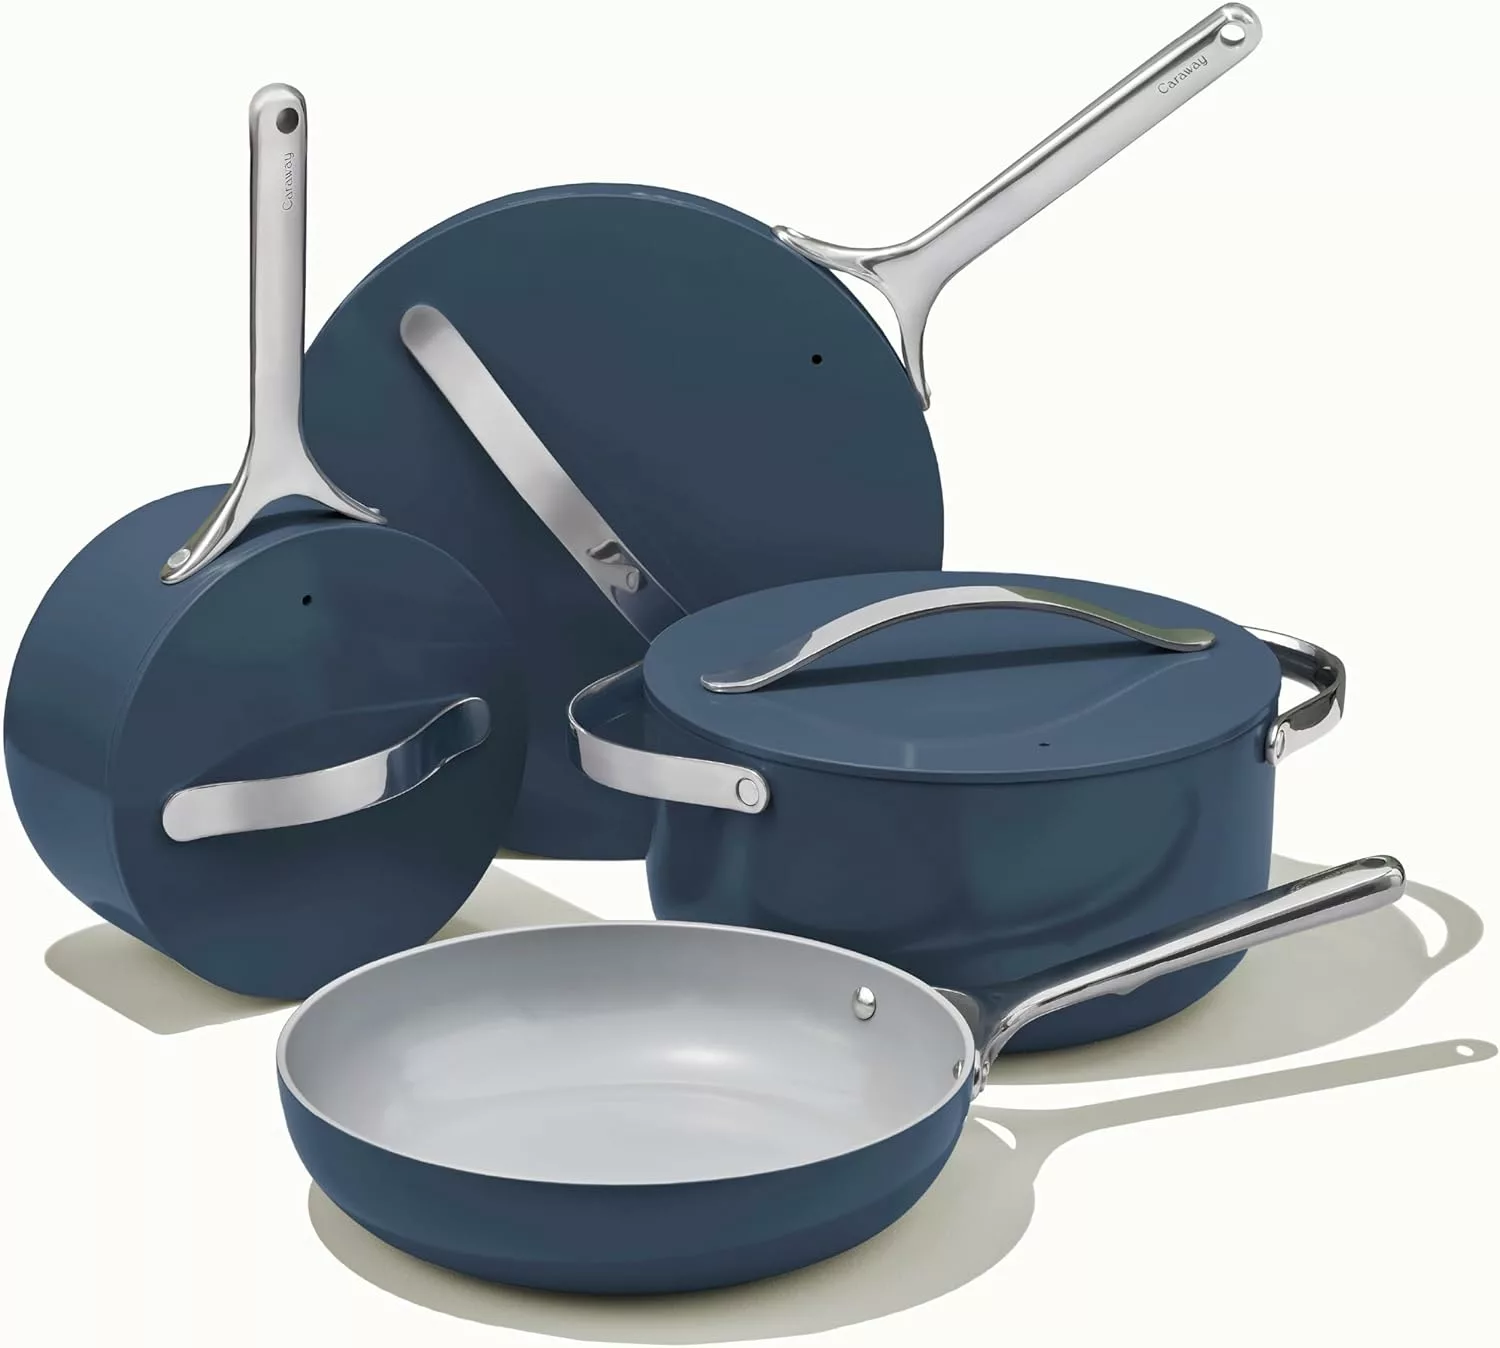 Best Ceramic Cookware Sets of 2023